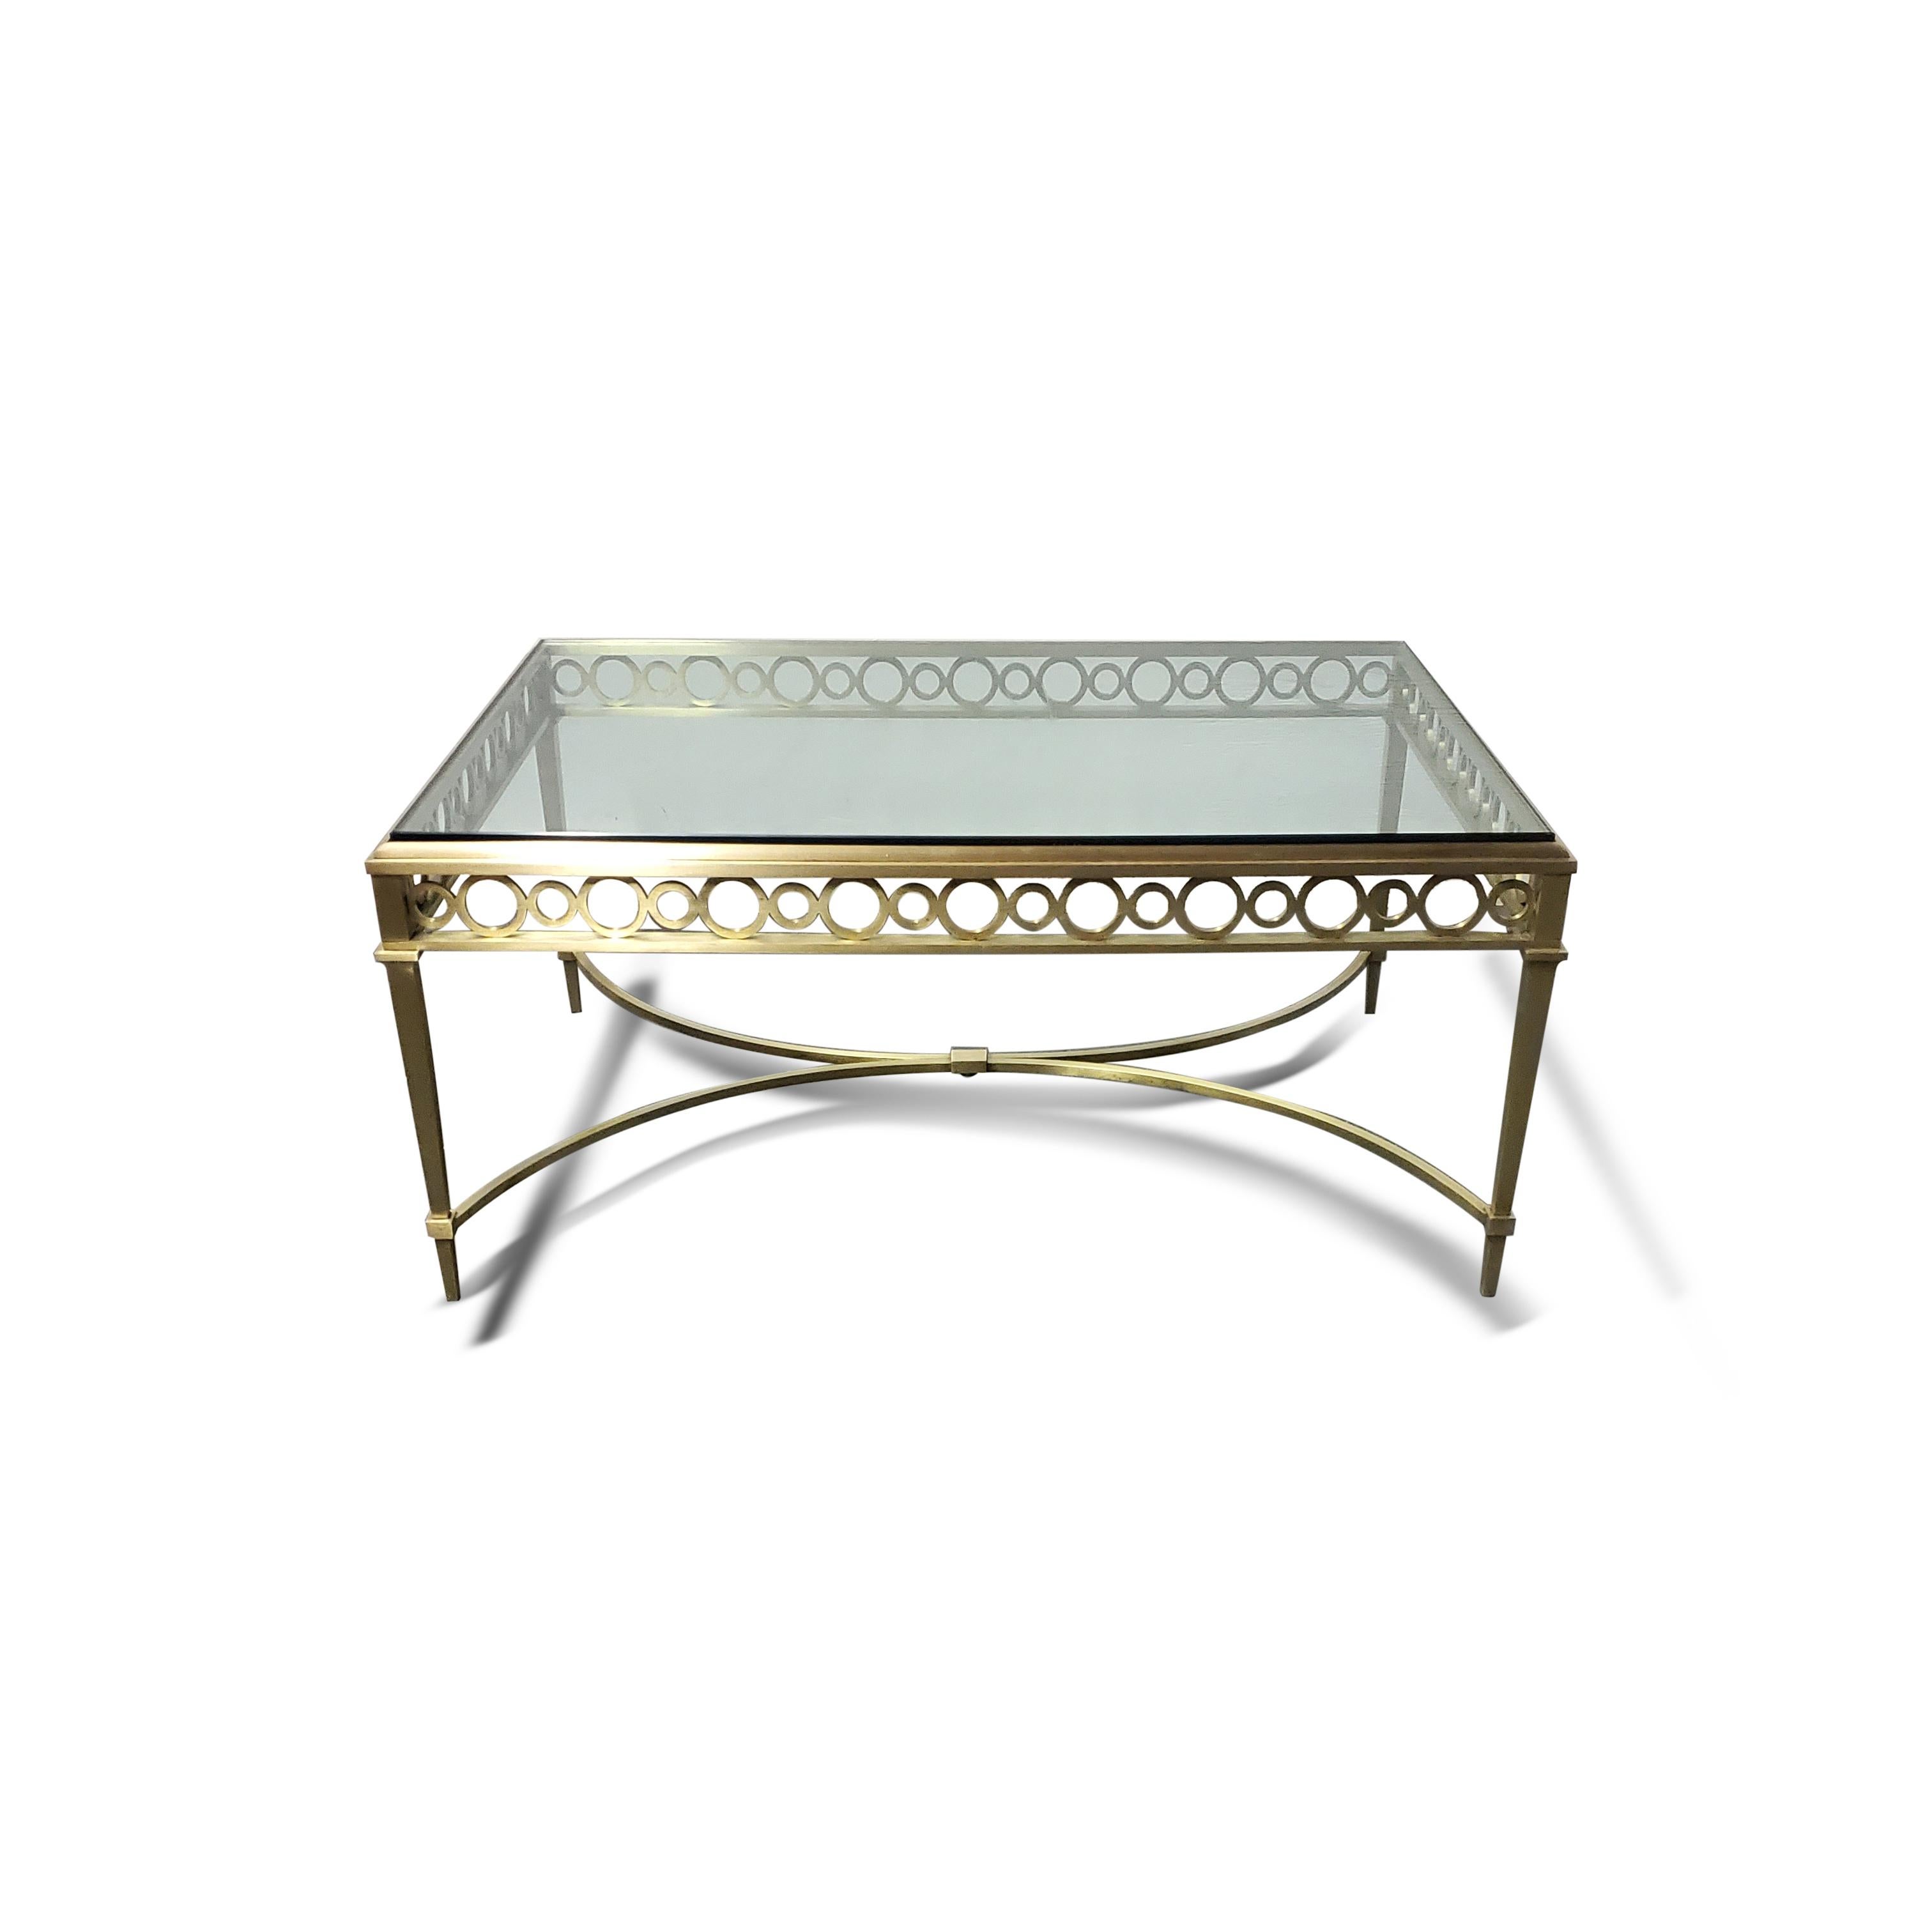 Maison Jansen bronze and glass coffee table.